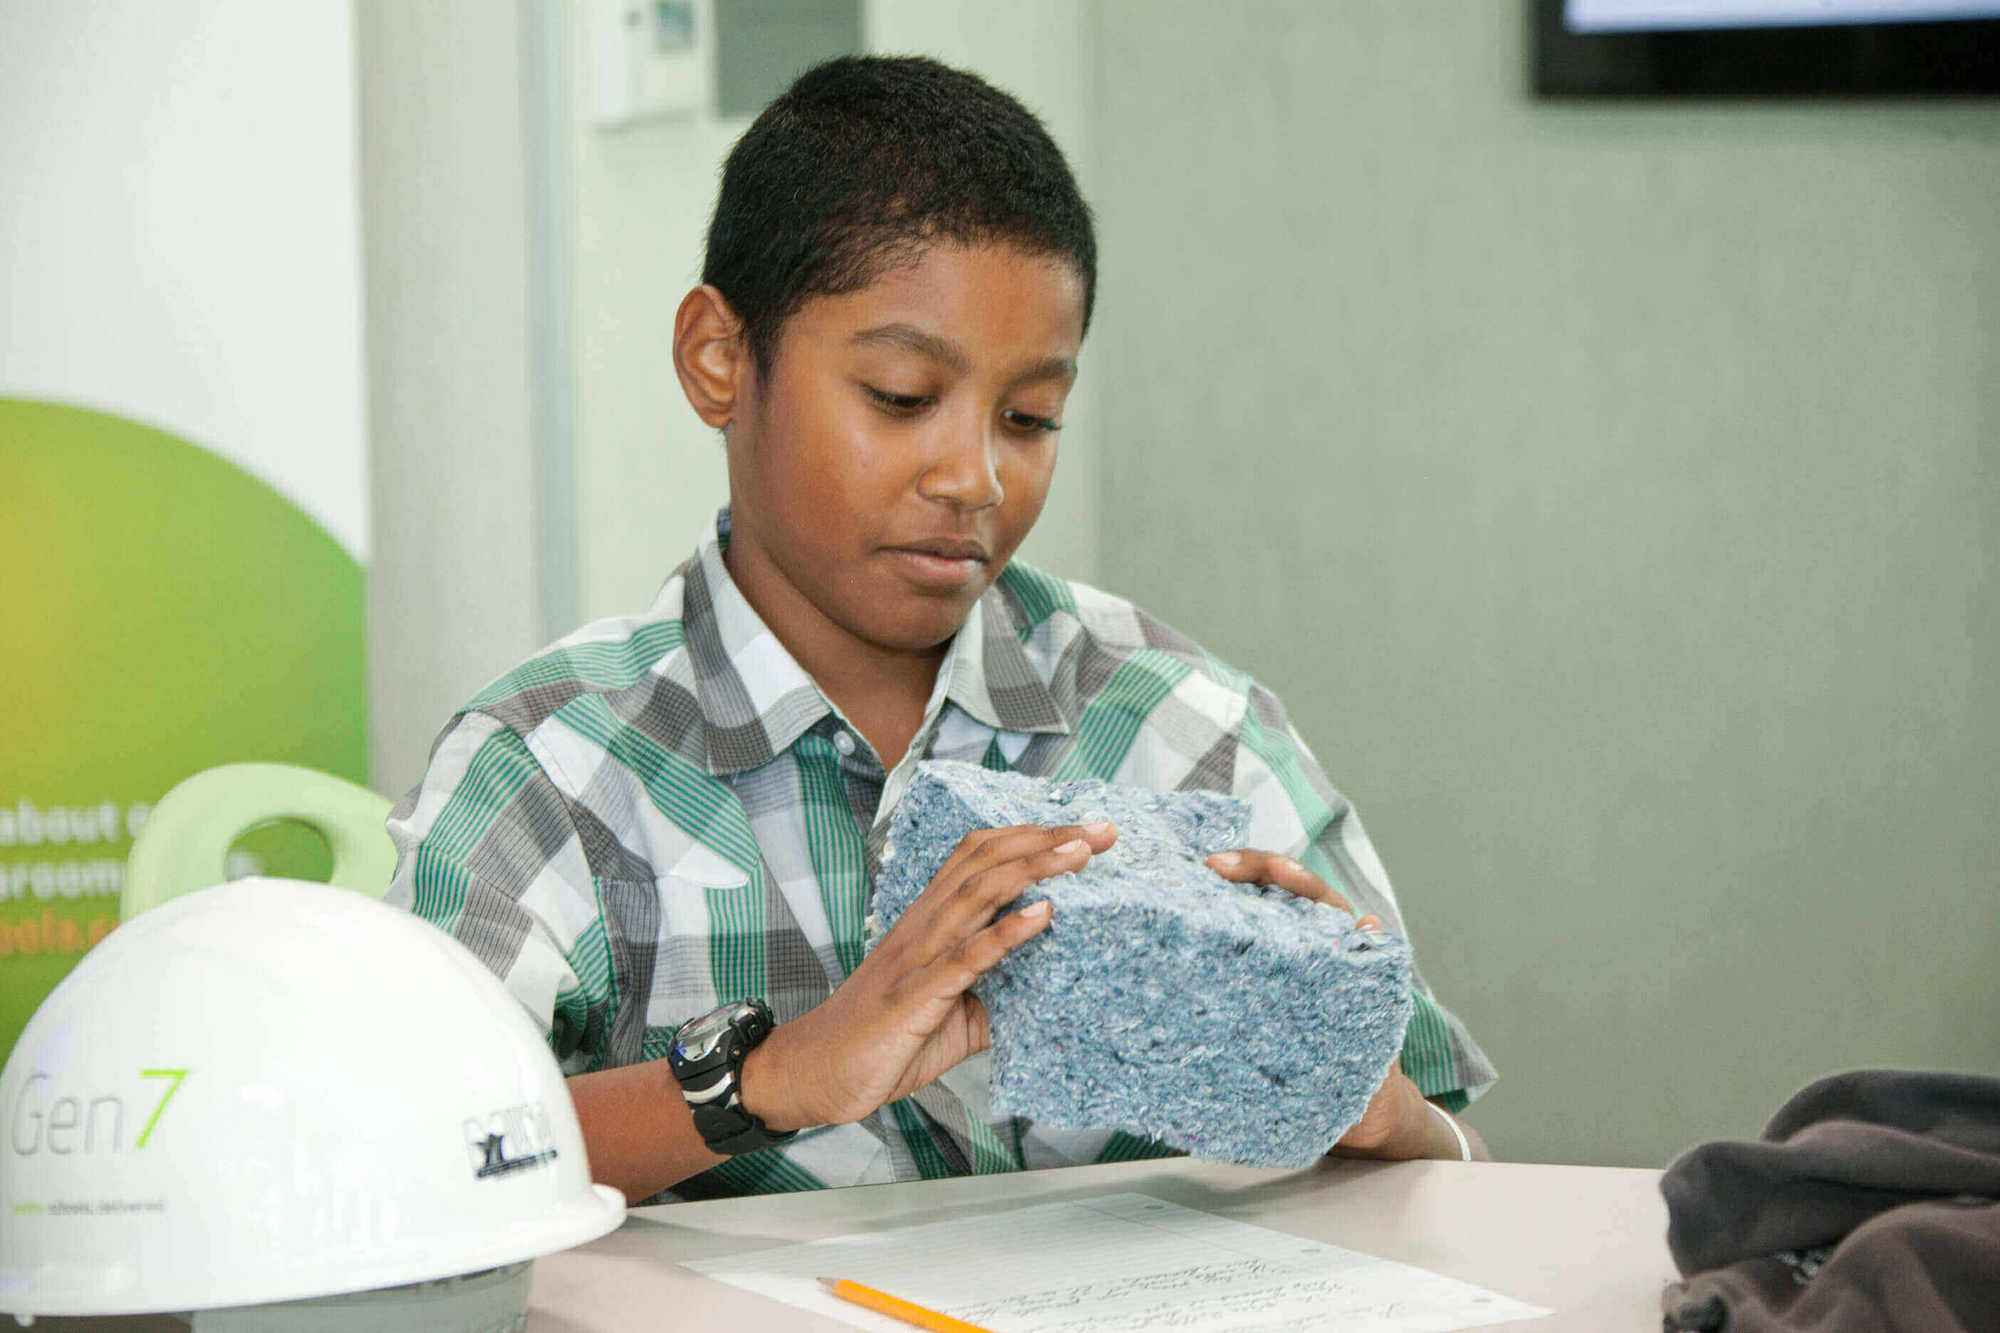 Recycled Denim Will Insulate Walls in the Latest Green Classrooms